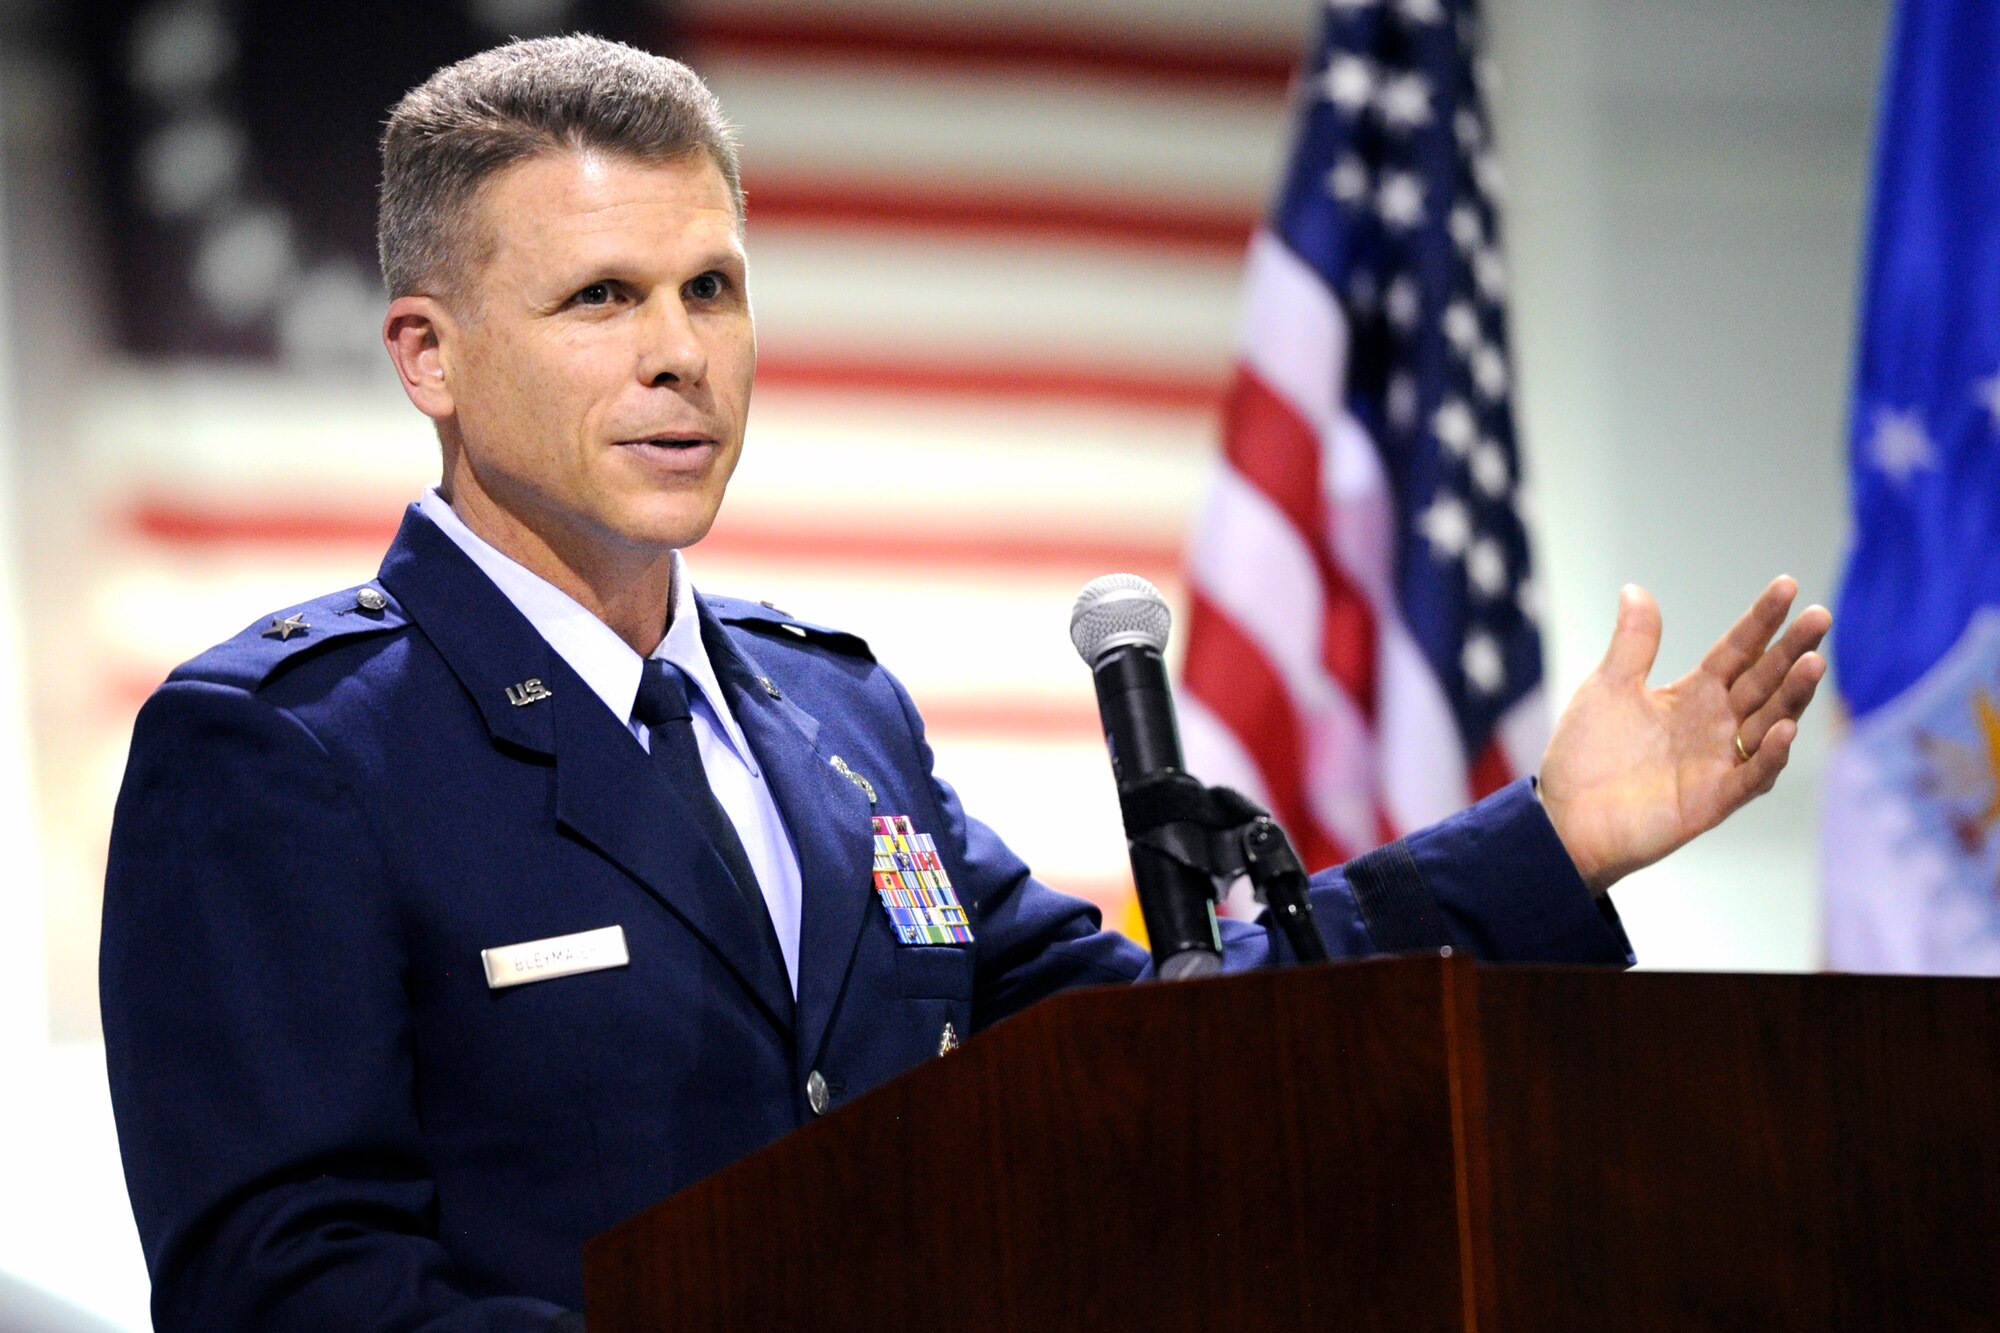 Brig. Gen. Steven J. Bleymaier, new Ogden Air Logistics Complex commander, speaks to an audience of Airmen, civilians, community partners, and state dignitaries during the Ogden ALC change of command ceremony at Hill Air Force Base, Utah, Aug. 31. Bleymaier, who previously served as director of staff at Air Force Materiel Command headquarters, said he is looking forward to becoming a part of Team Hill’s success and continuing the “AFSC Way journey.”